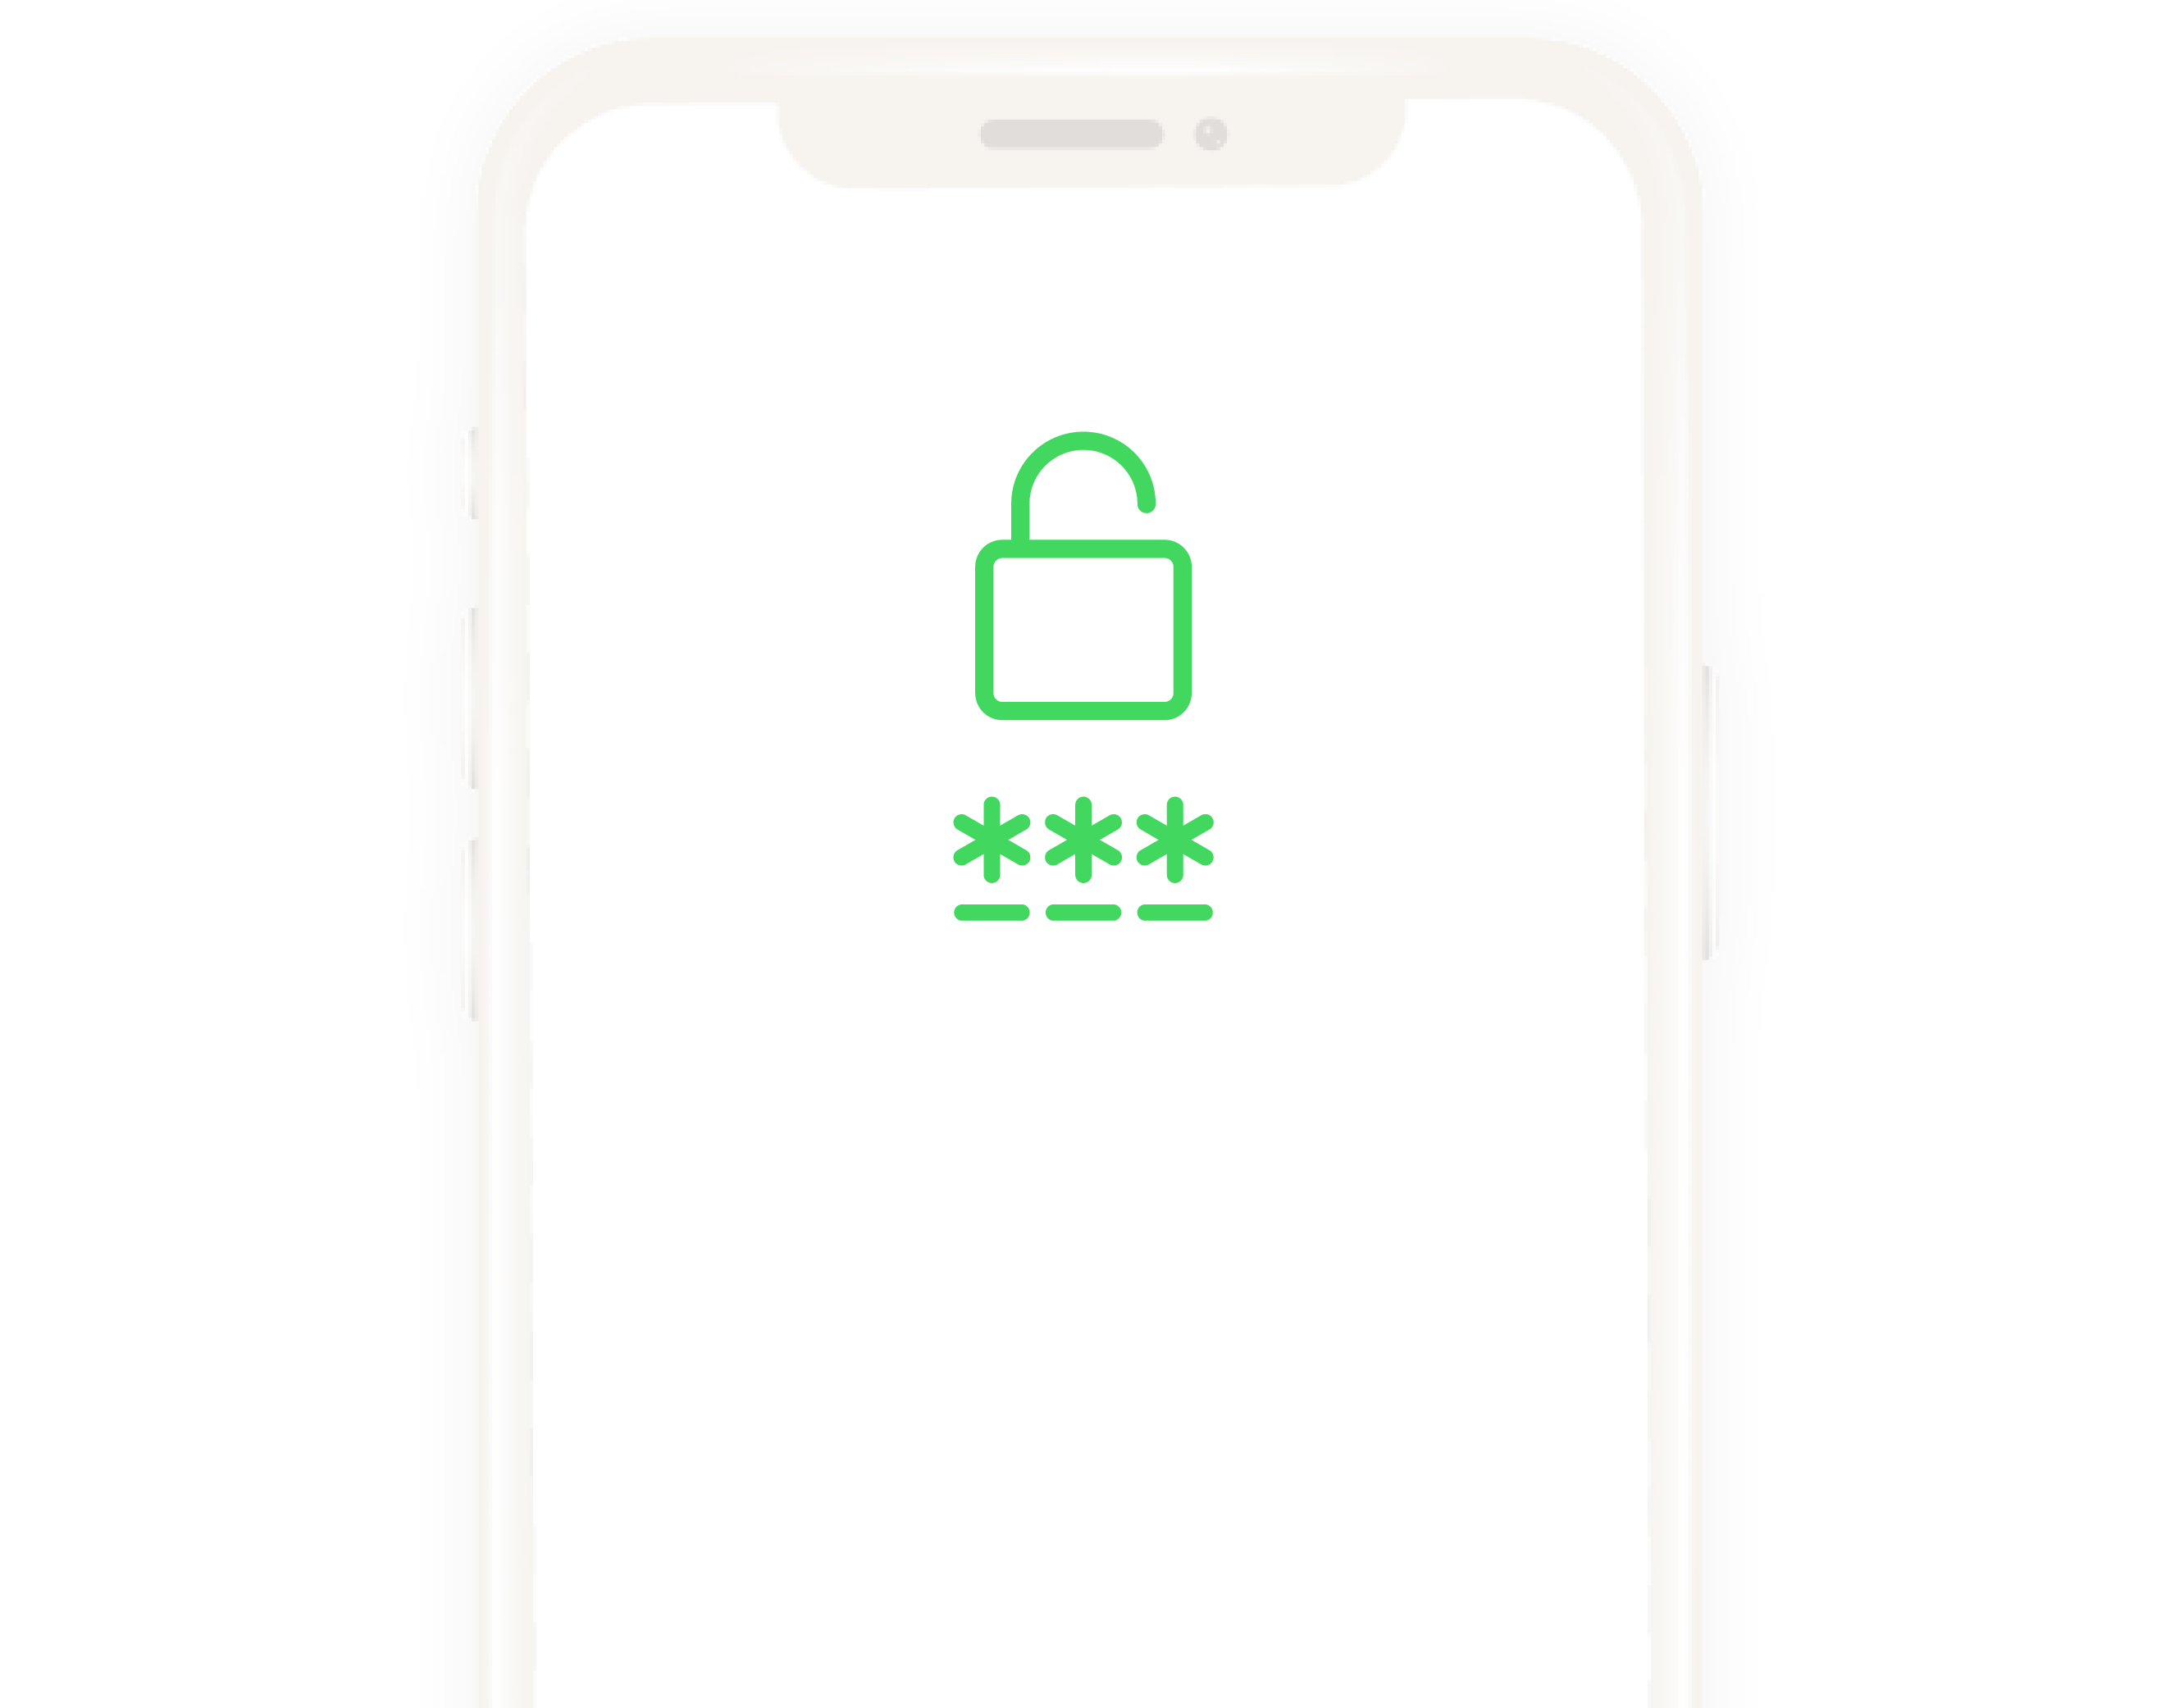 Illustration of the upper half of a smartphone. On the white screen there is a green icon of an open security lock with three asterisks under it.